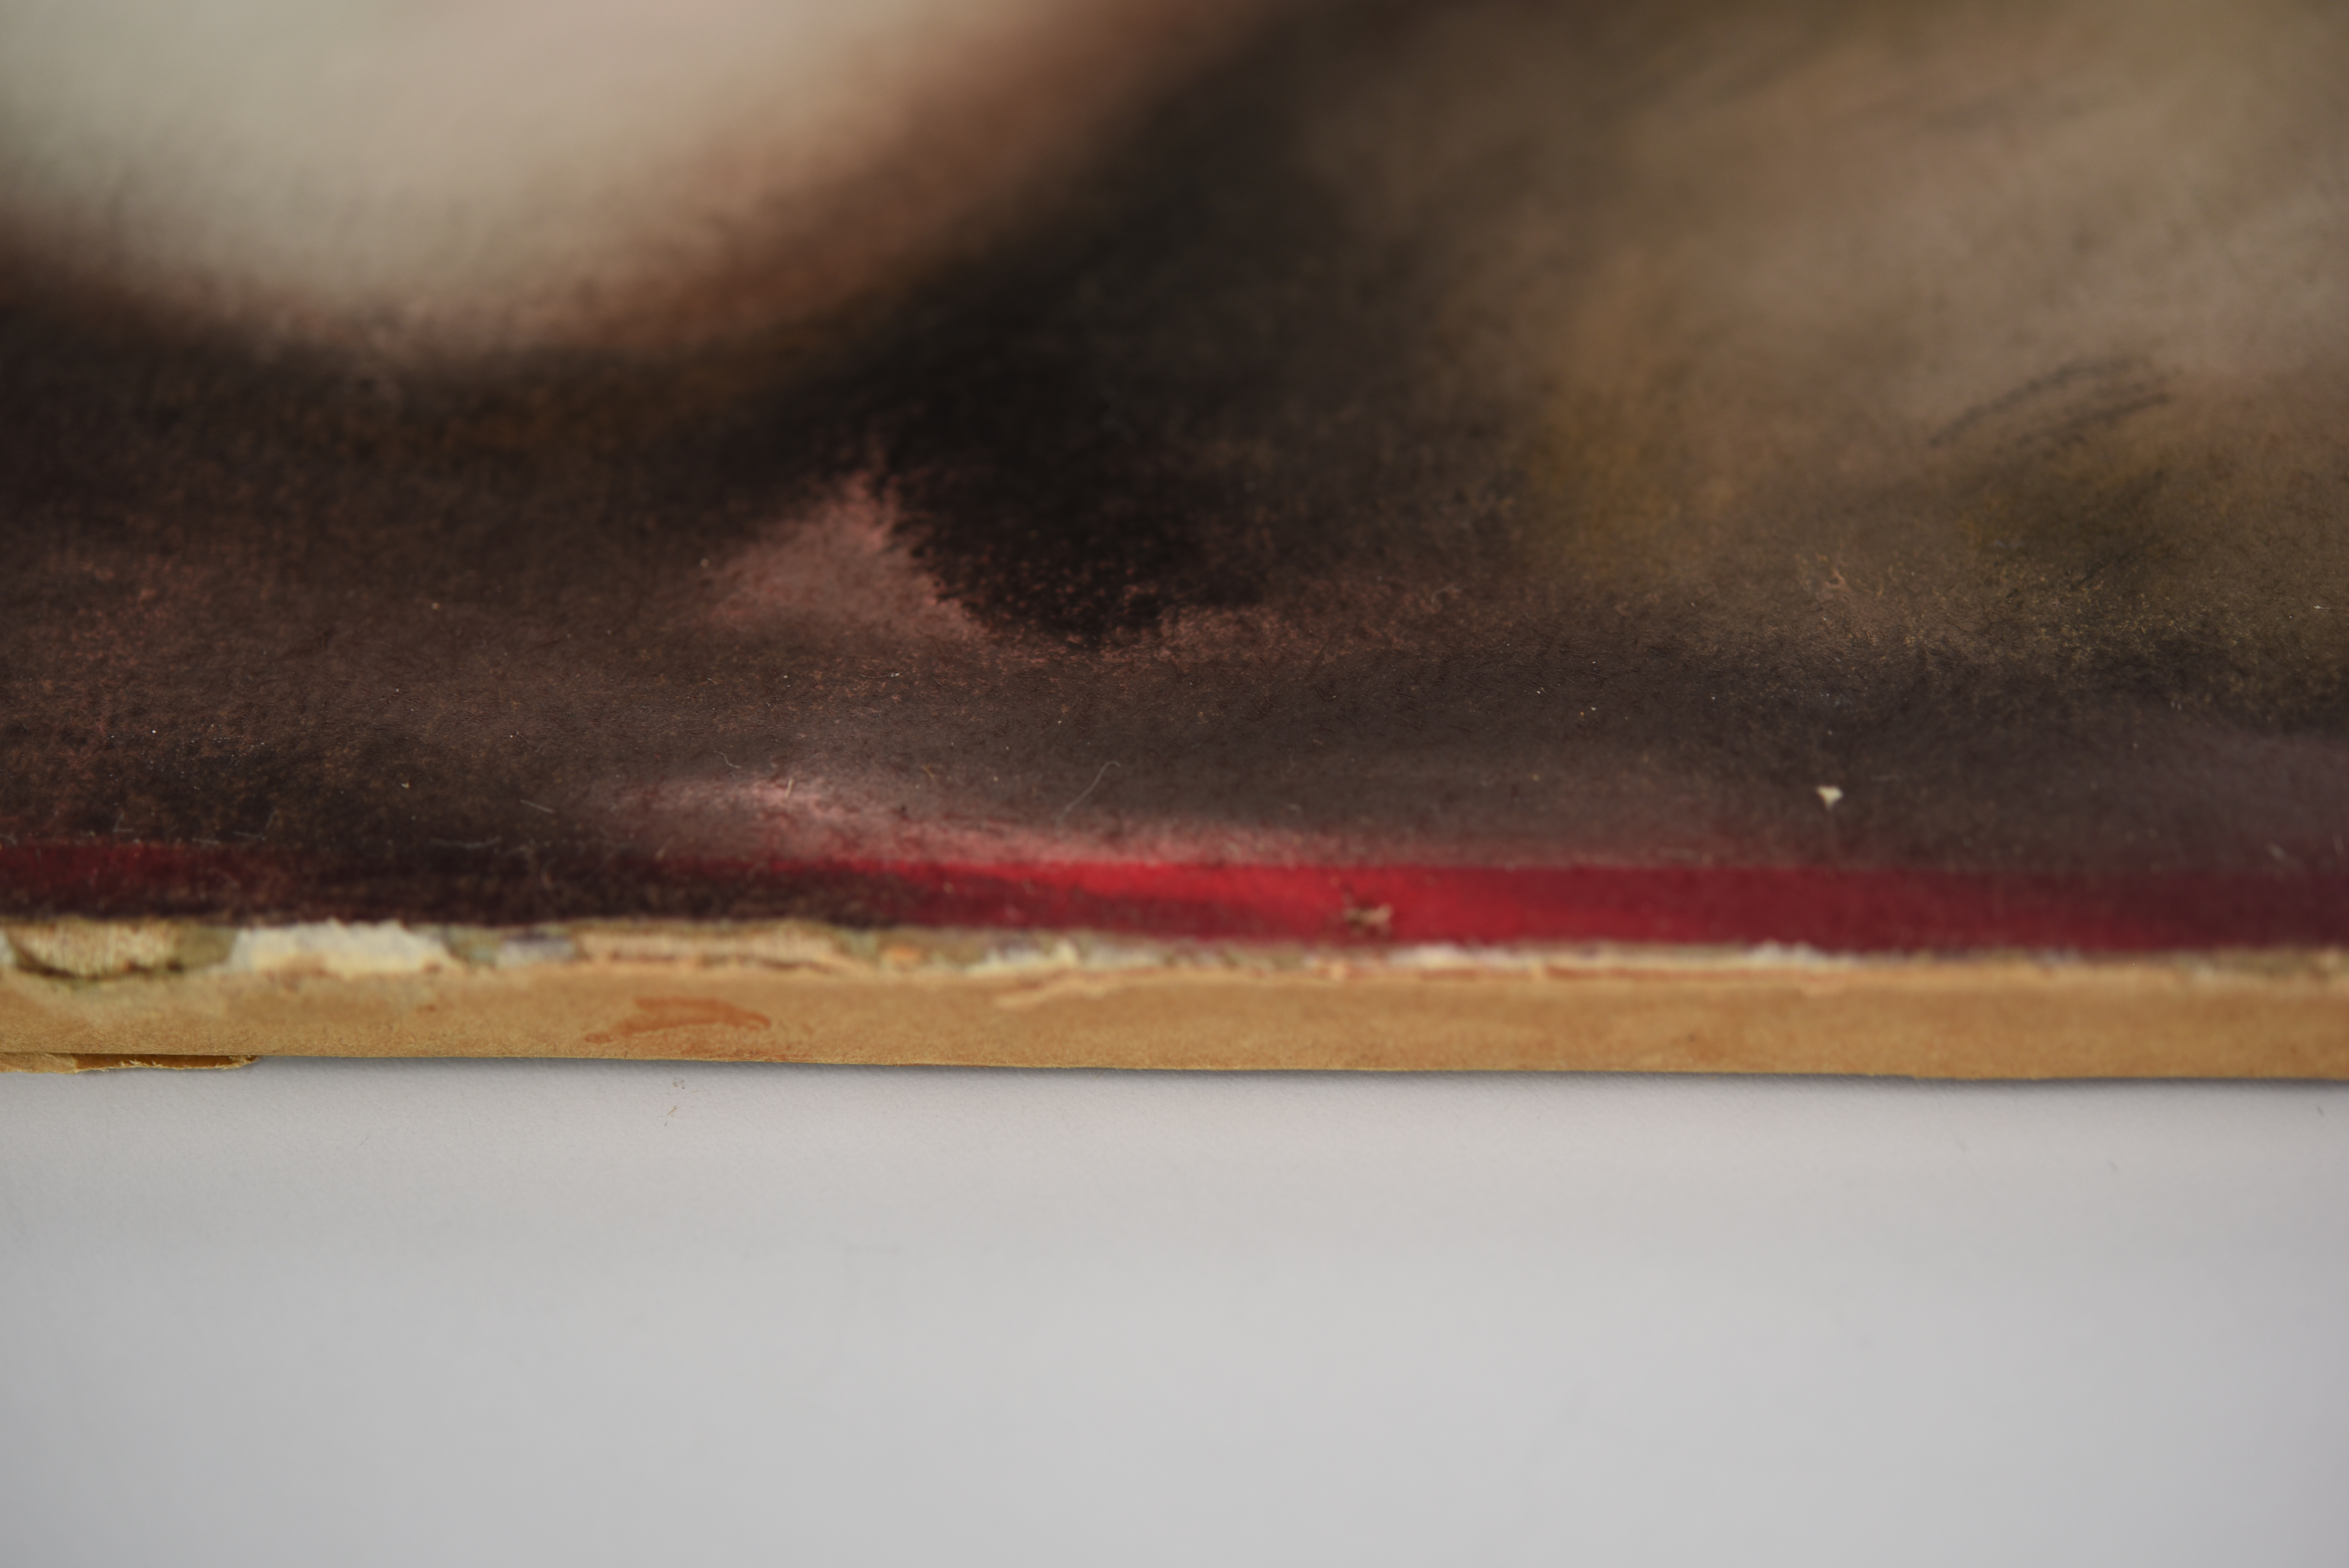 Detail of the strips of the original fuchsia colour along the bottom edge of the pastel